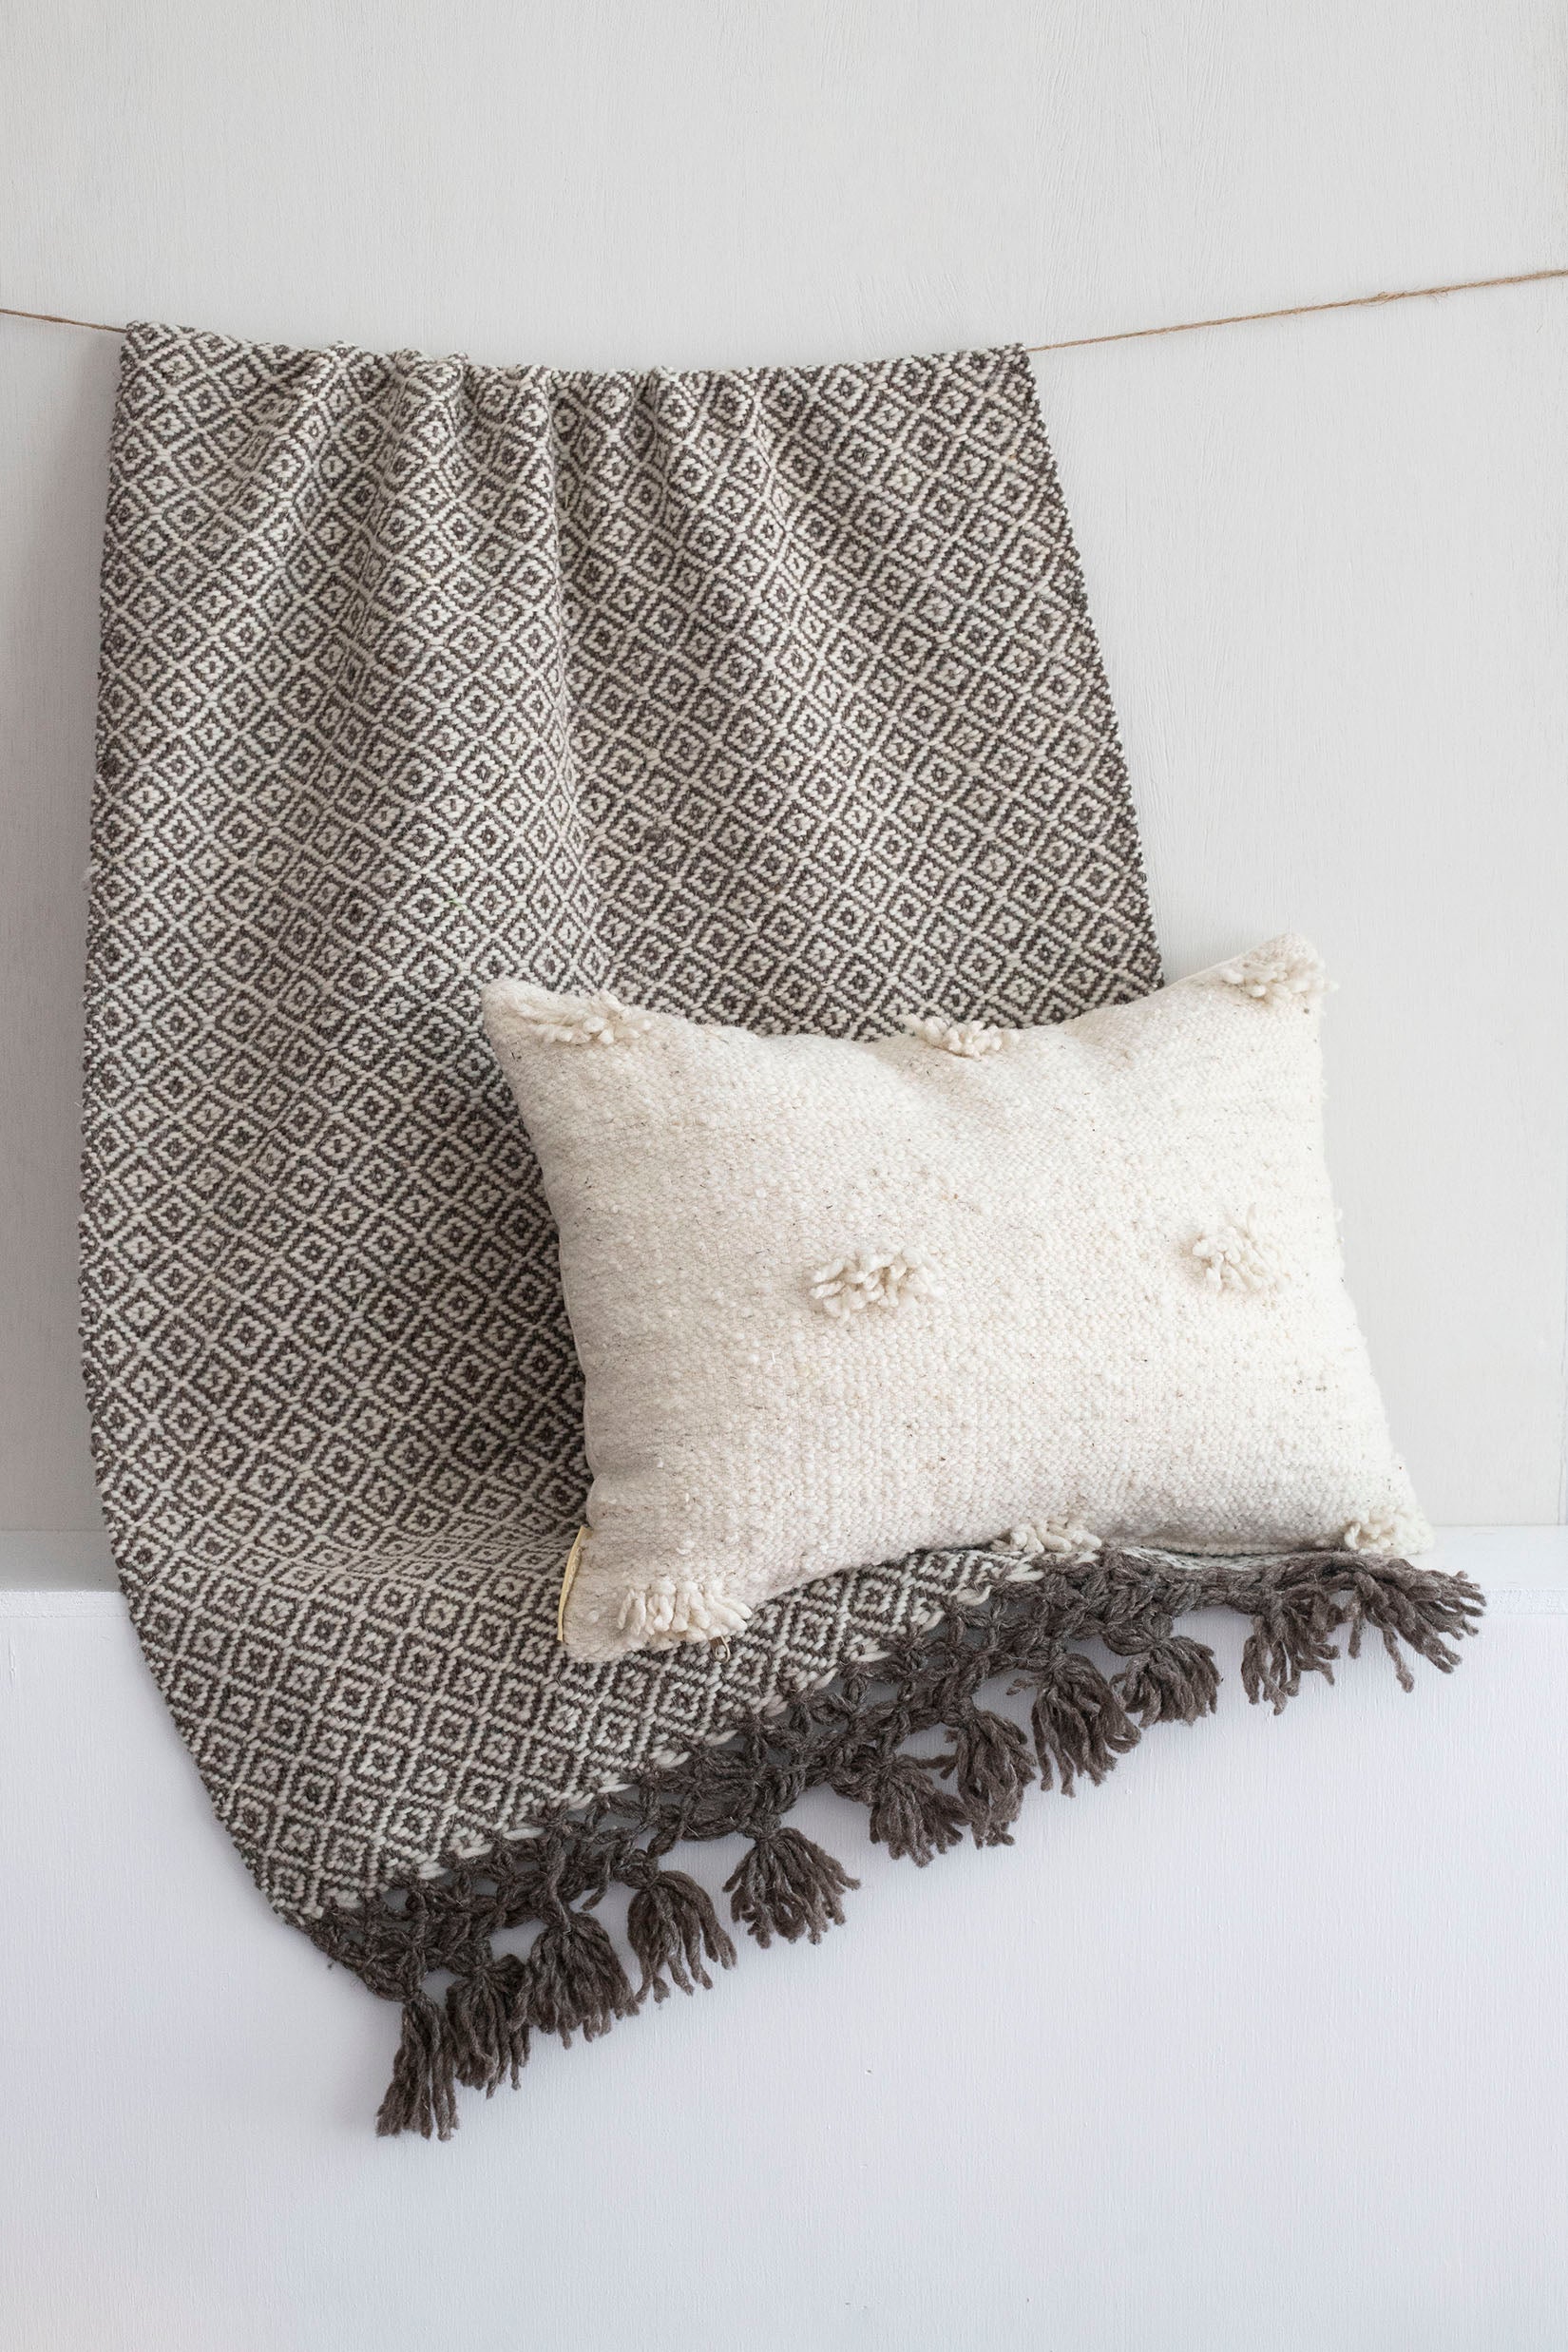 Small cream lumbar throw pillow with fringe accents sitting atop a dark brown and white wool throw in a diamond design.